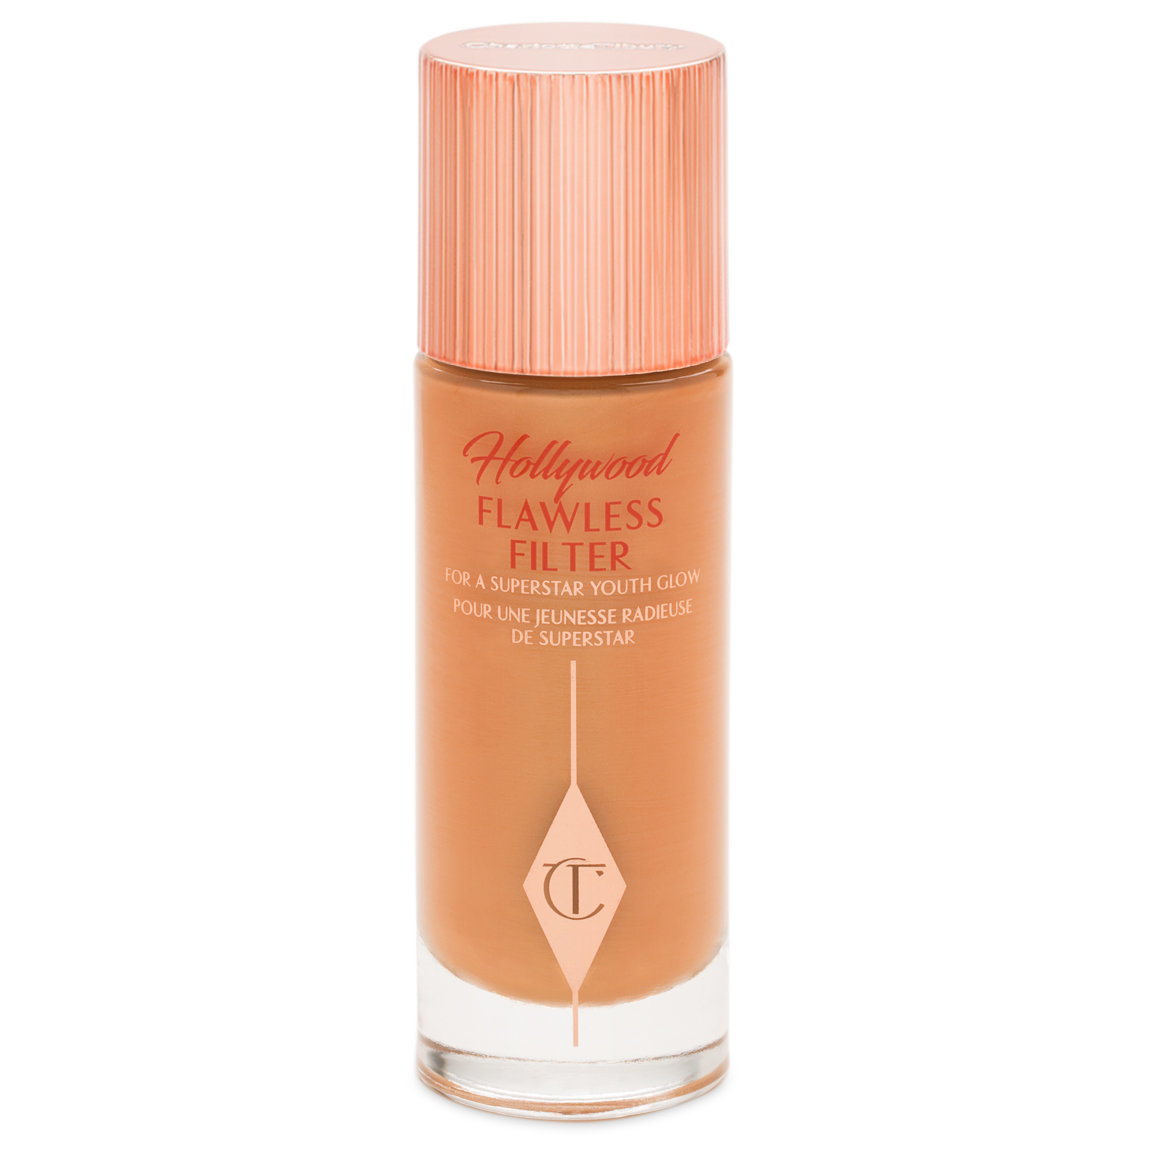 products like charlotte tilbury flawless filter